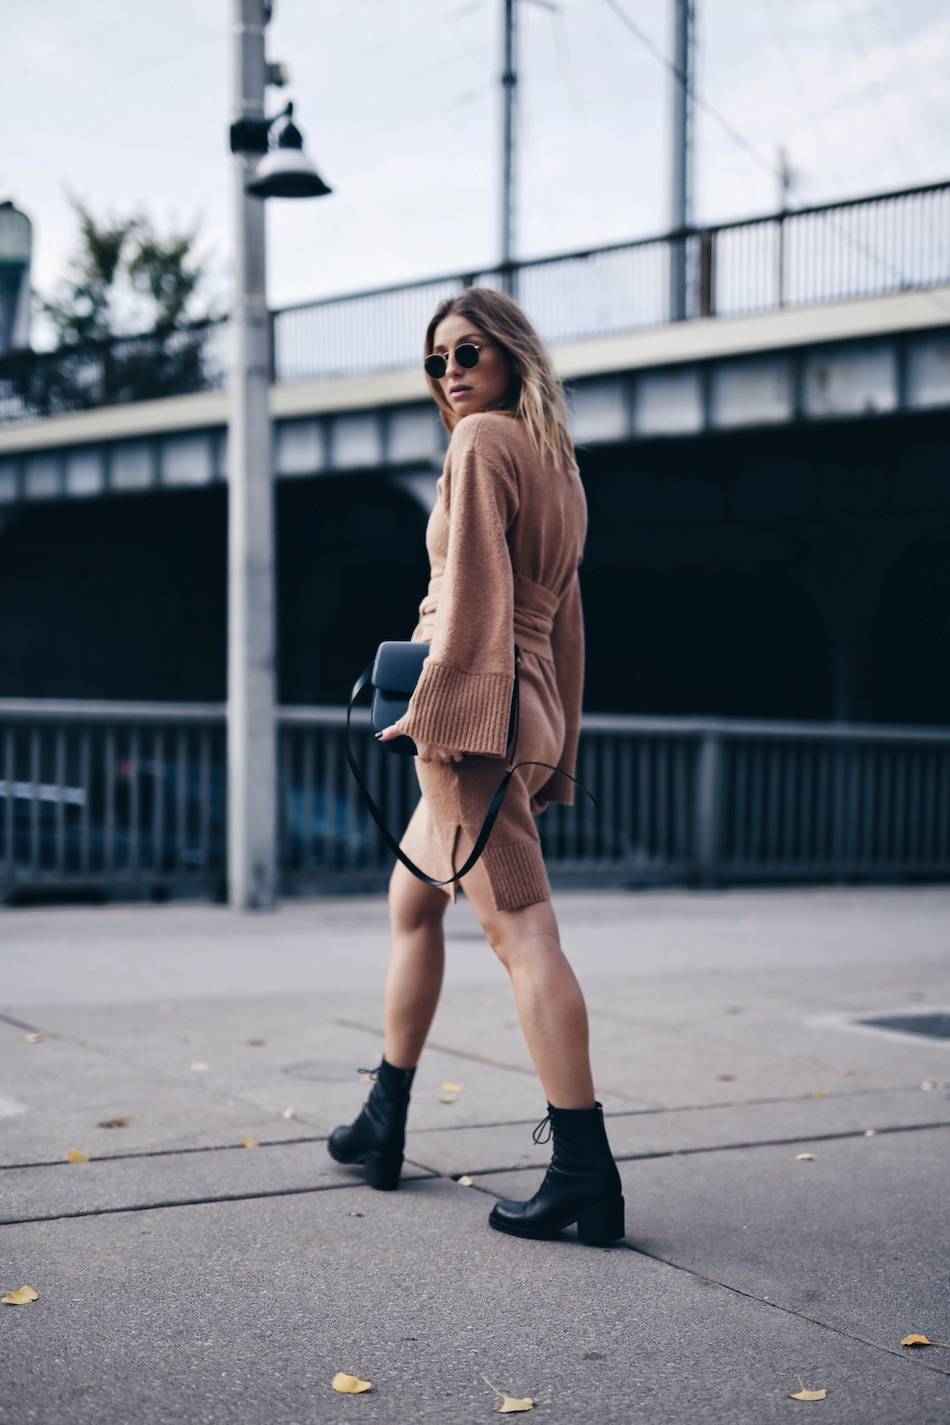 style-blogger-jill-lansky-of-the-august-diaries-wearing-chic-winter-style-in-3-1-phillip-lim-knit-dress